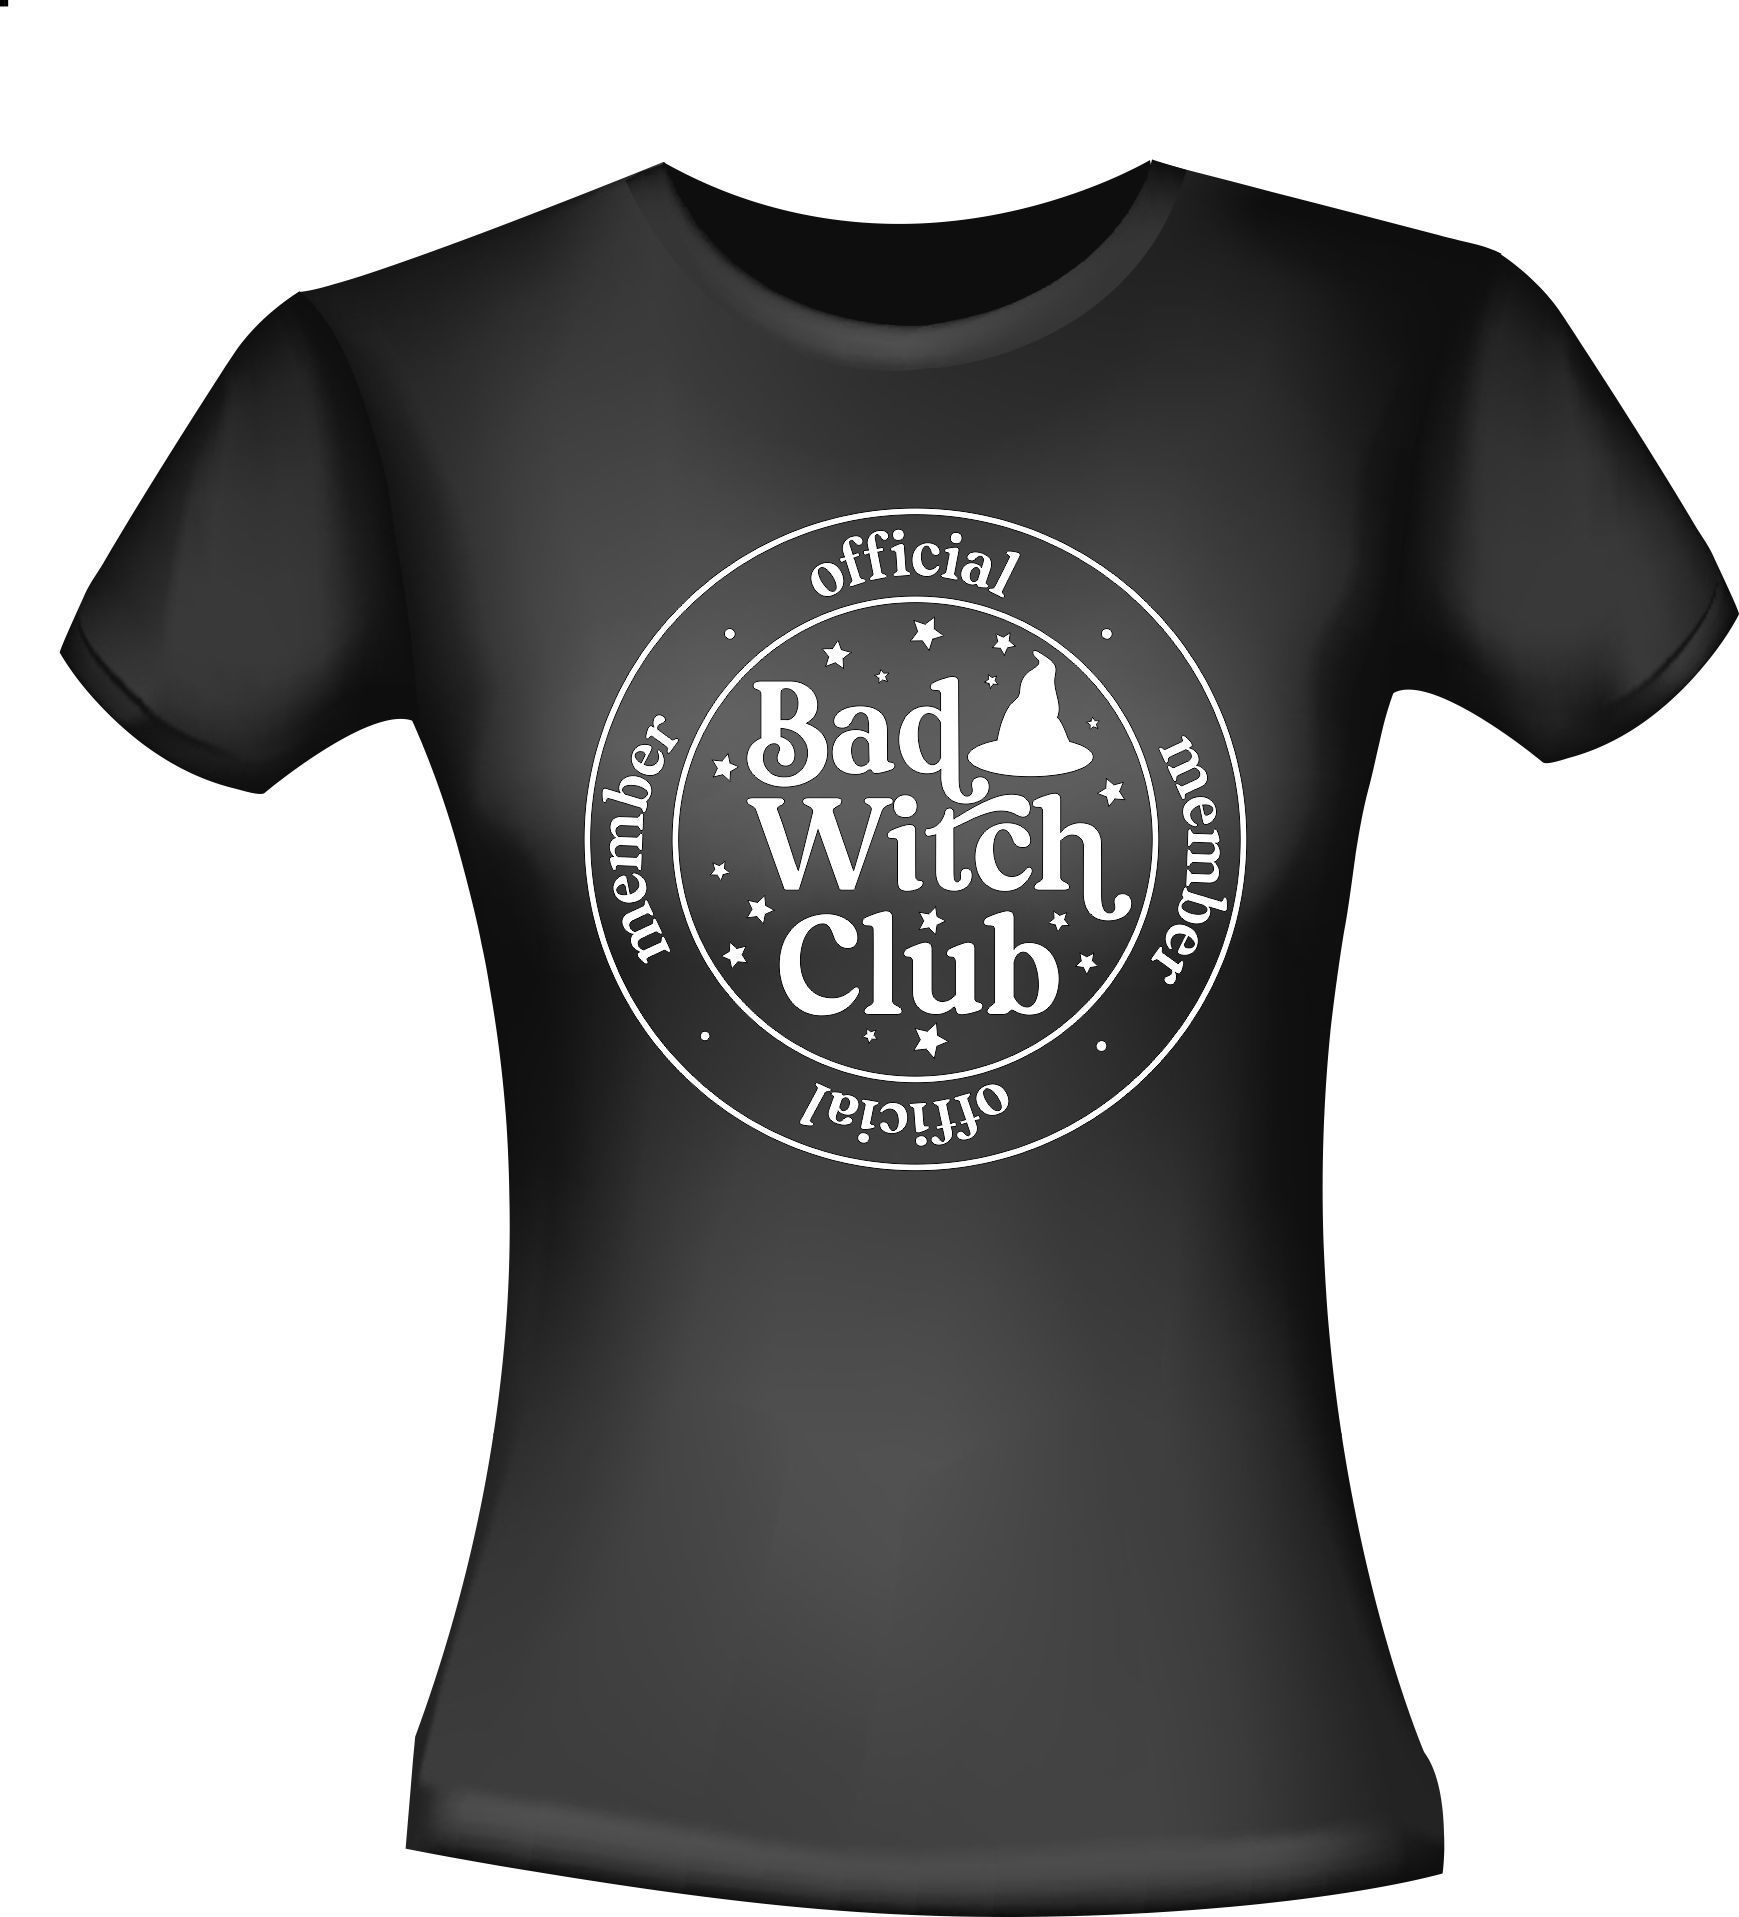 T-shirt official member bad witch club